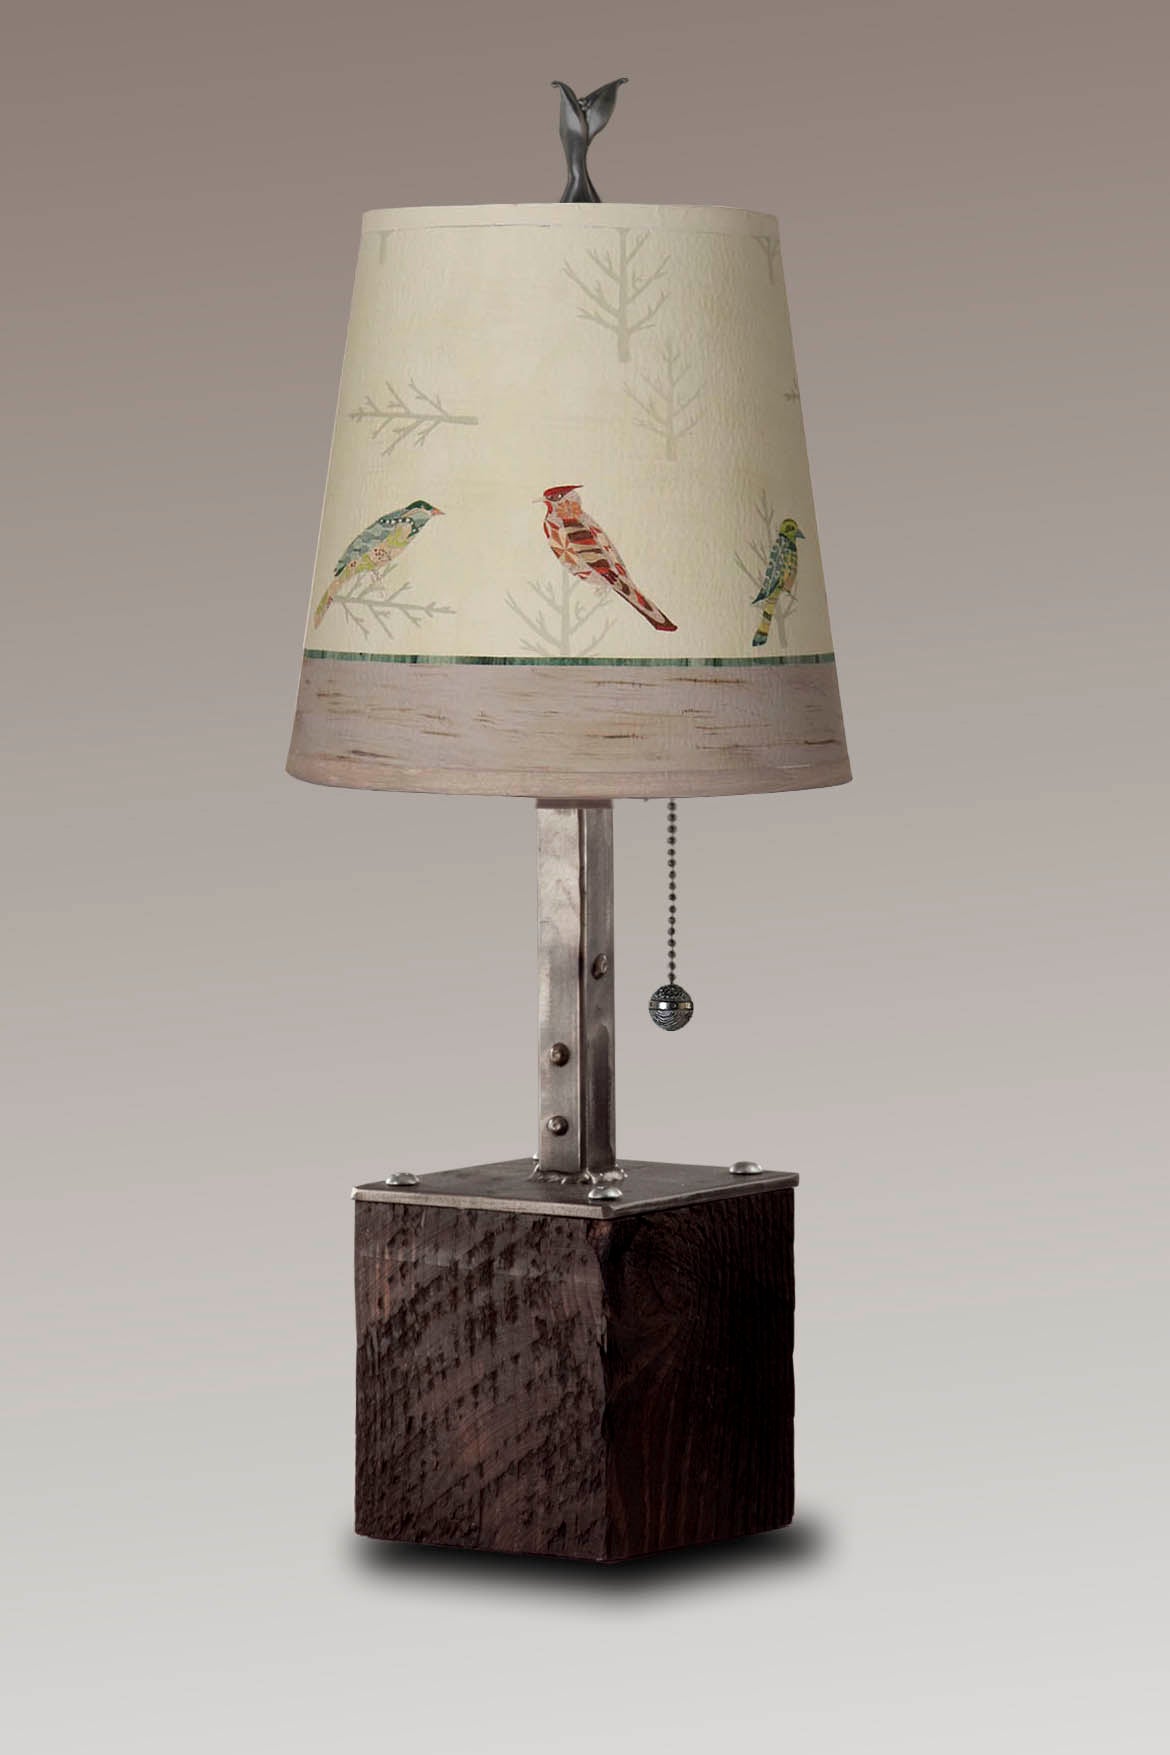 Janna Ugone &amp; Co Table Lamp Steel Table Lamp on Reclaimed Wood with Small Drum Shade in Bird Friends